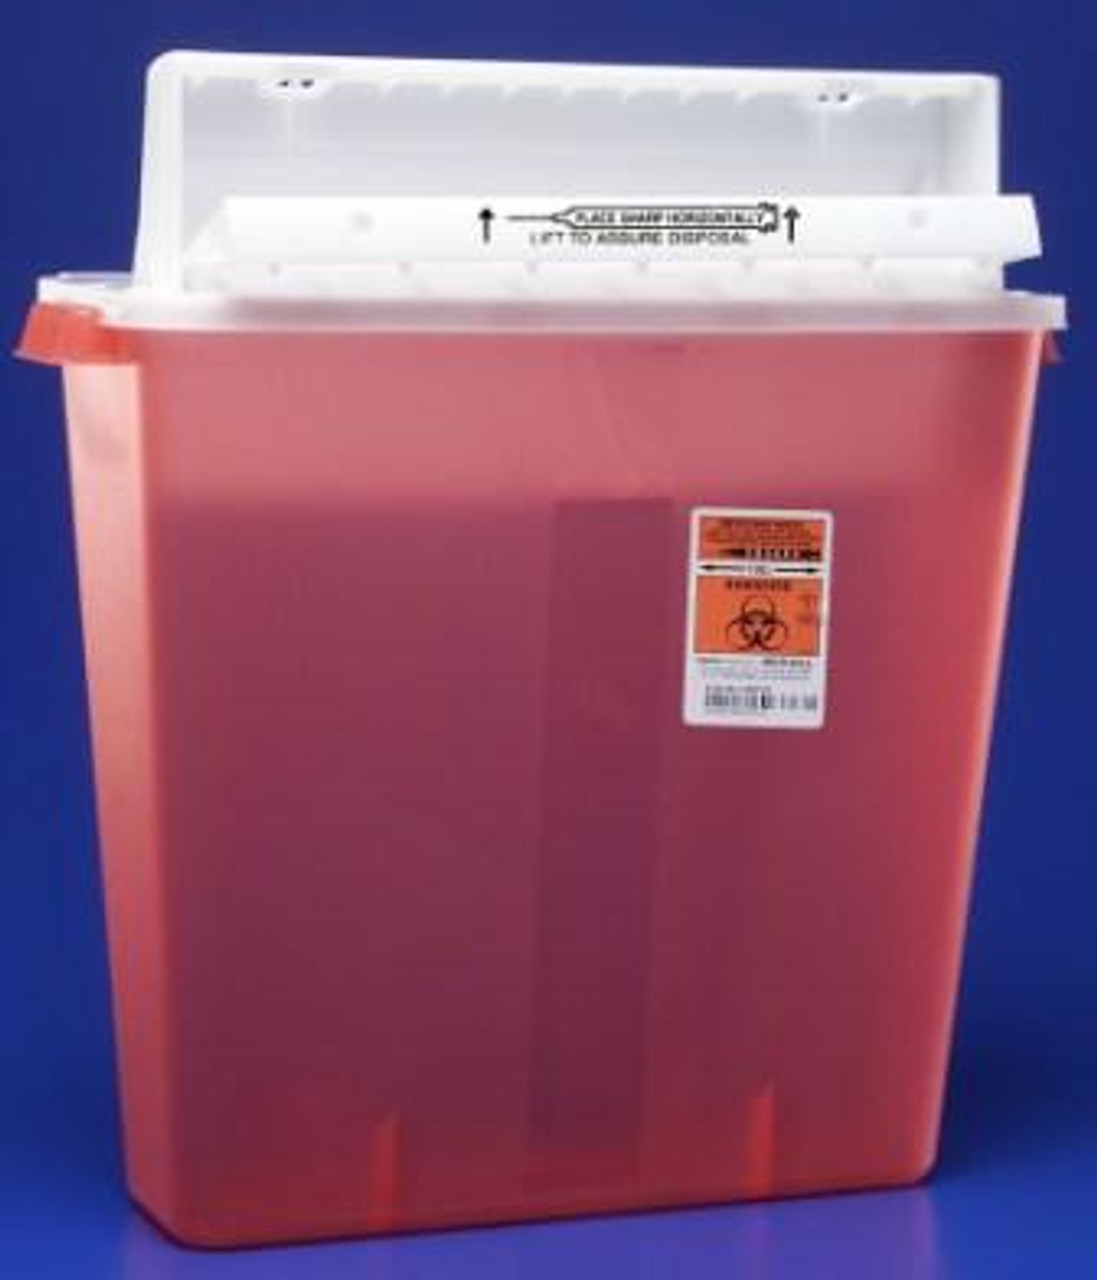 5 Quart Sharps Container #8513 by Kendall / Covidien - Medical